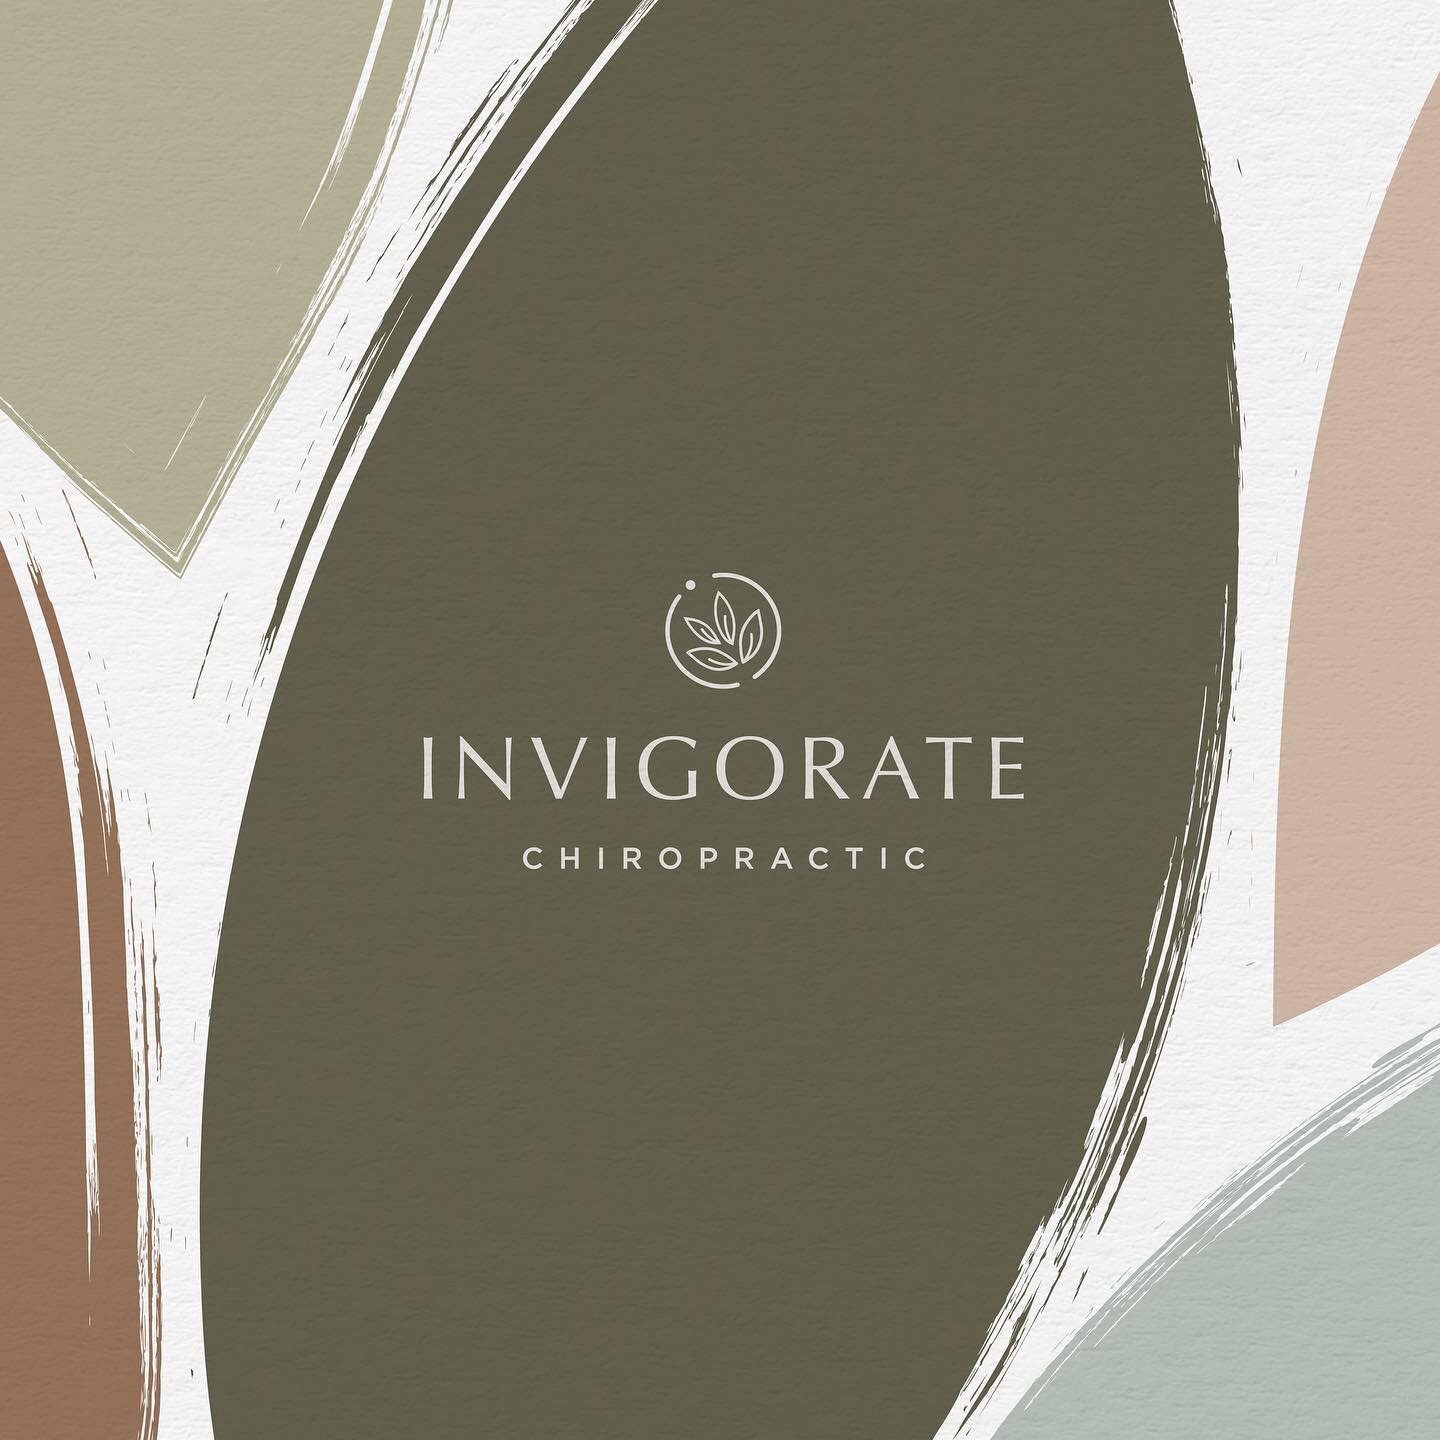 So excited for @invigorate_chiropractic and their new brand launch! It&rsquo;s been such a joy so far collaborating with this dream client (who, in addition, is our very own chiropractor that serves my family and I so well! 🥰) Their wonderful busine